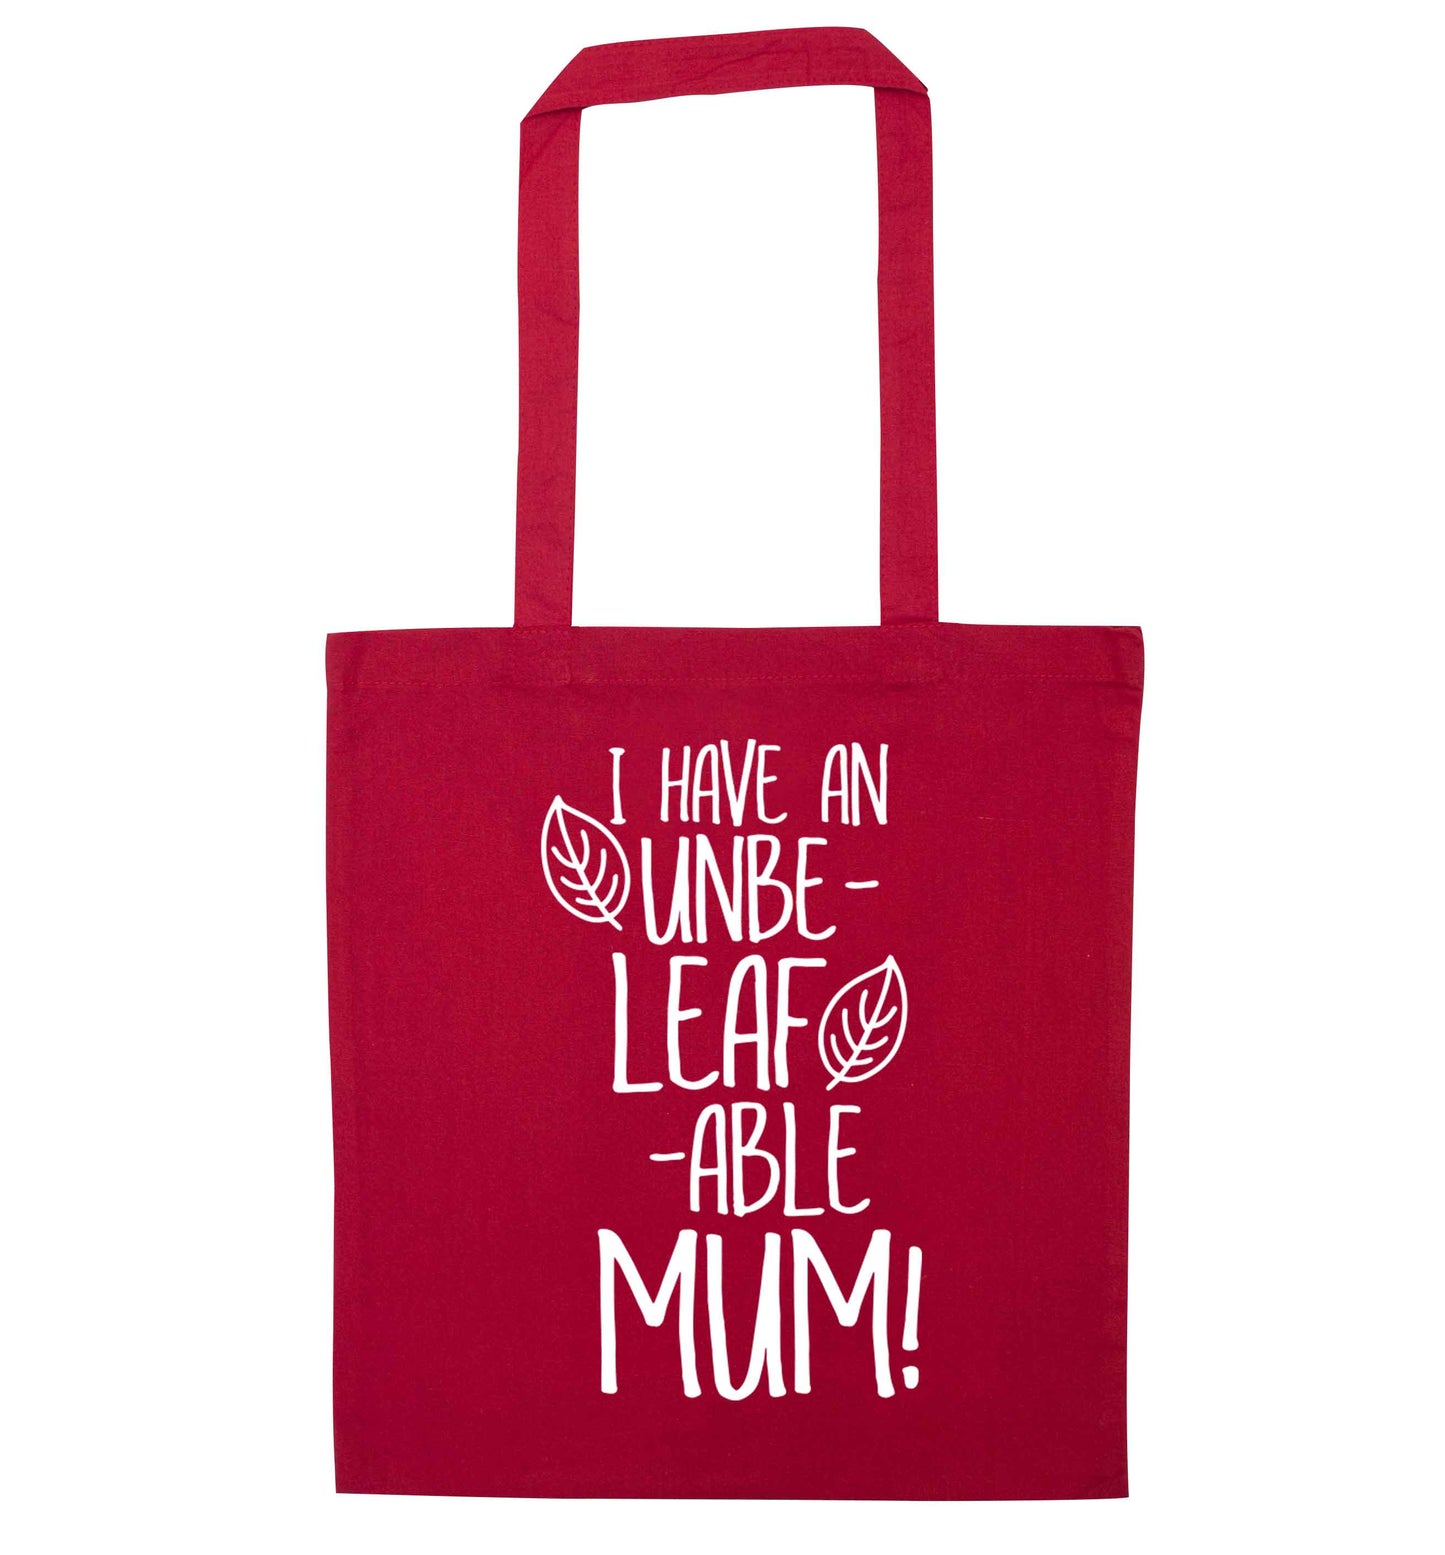 I have an unbeleafable mum! red tote bag